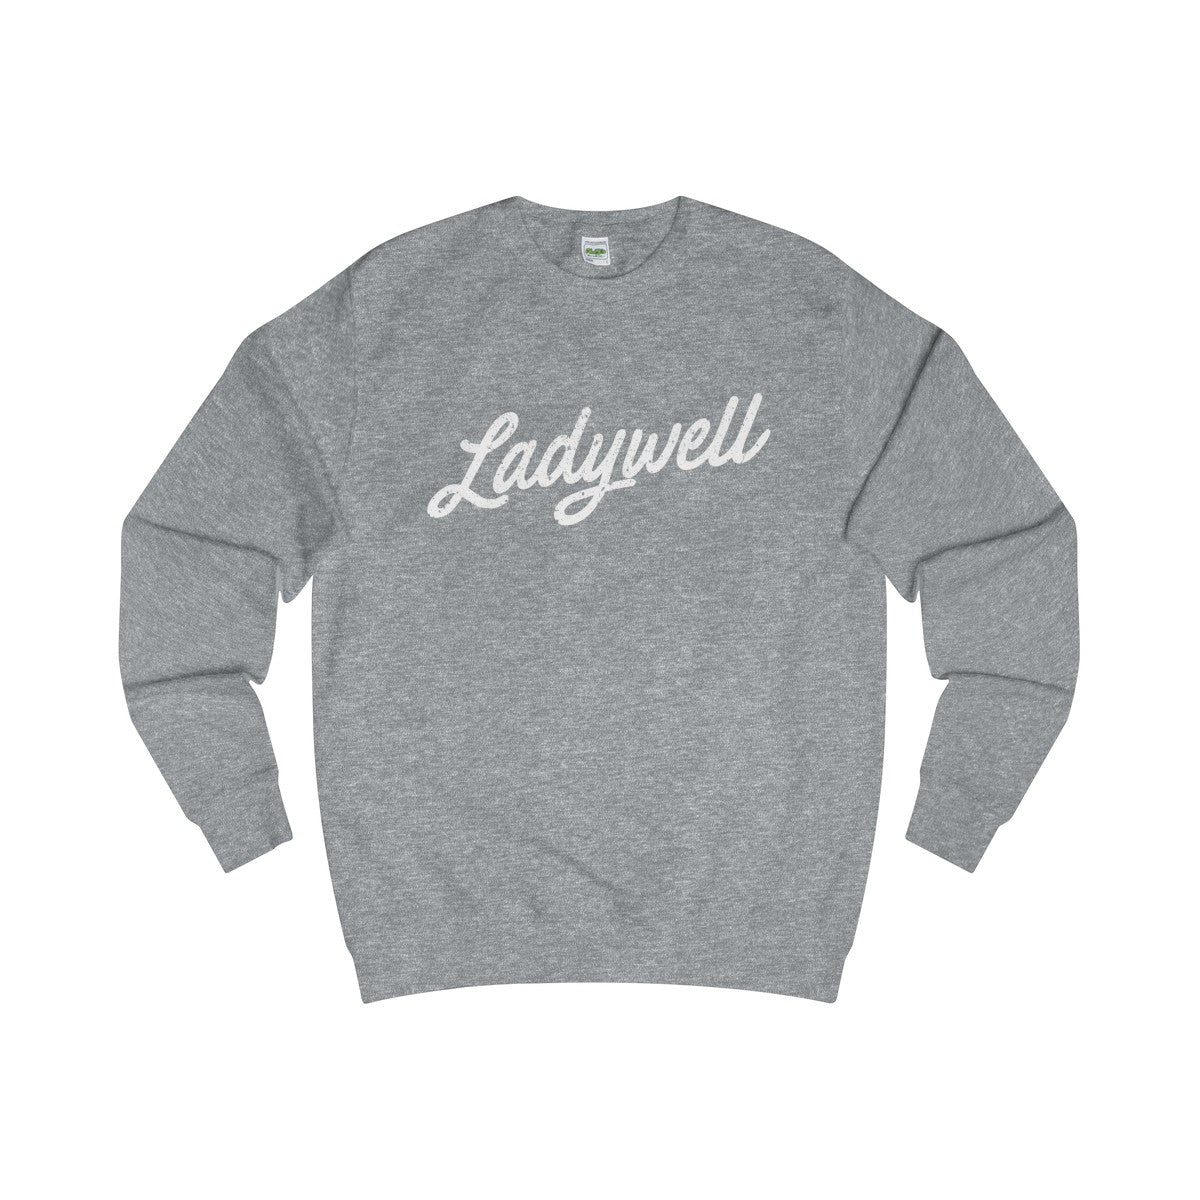 Ladywell Scripted Sweater